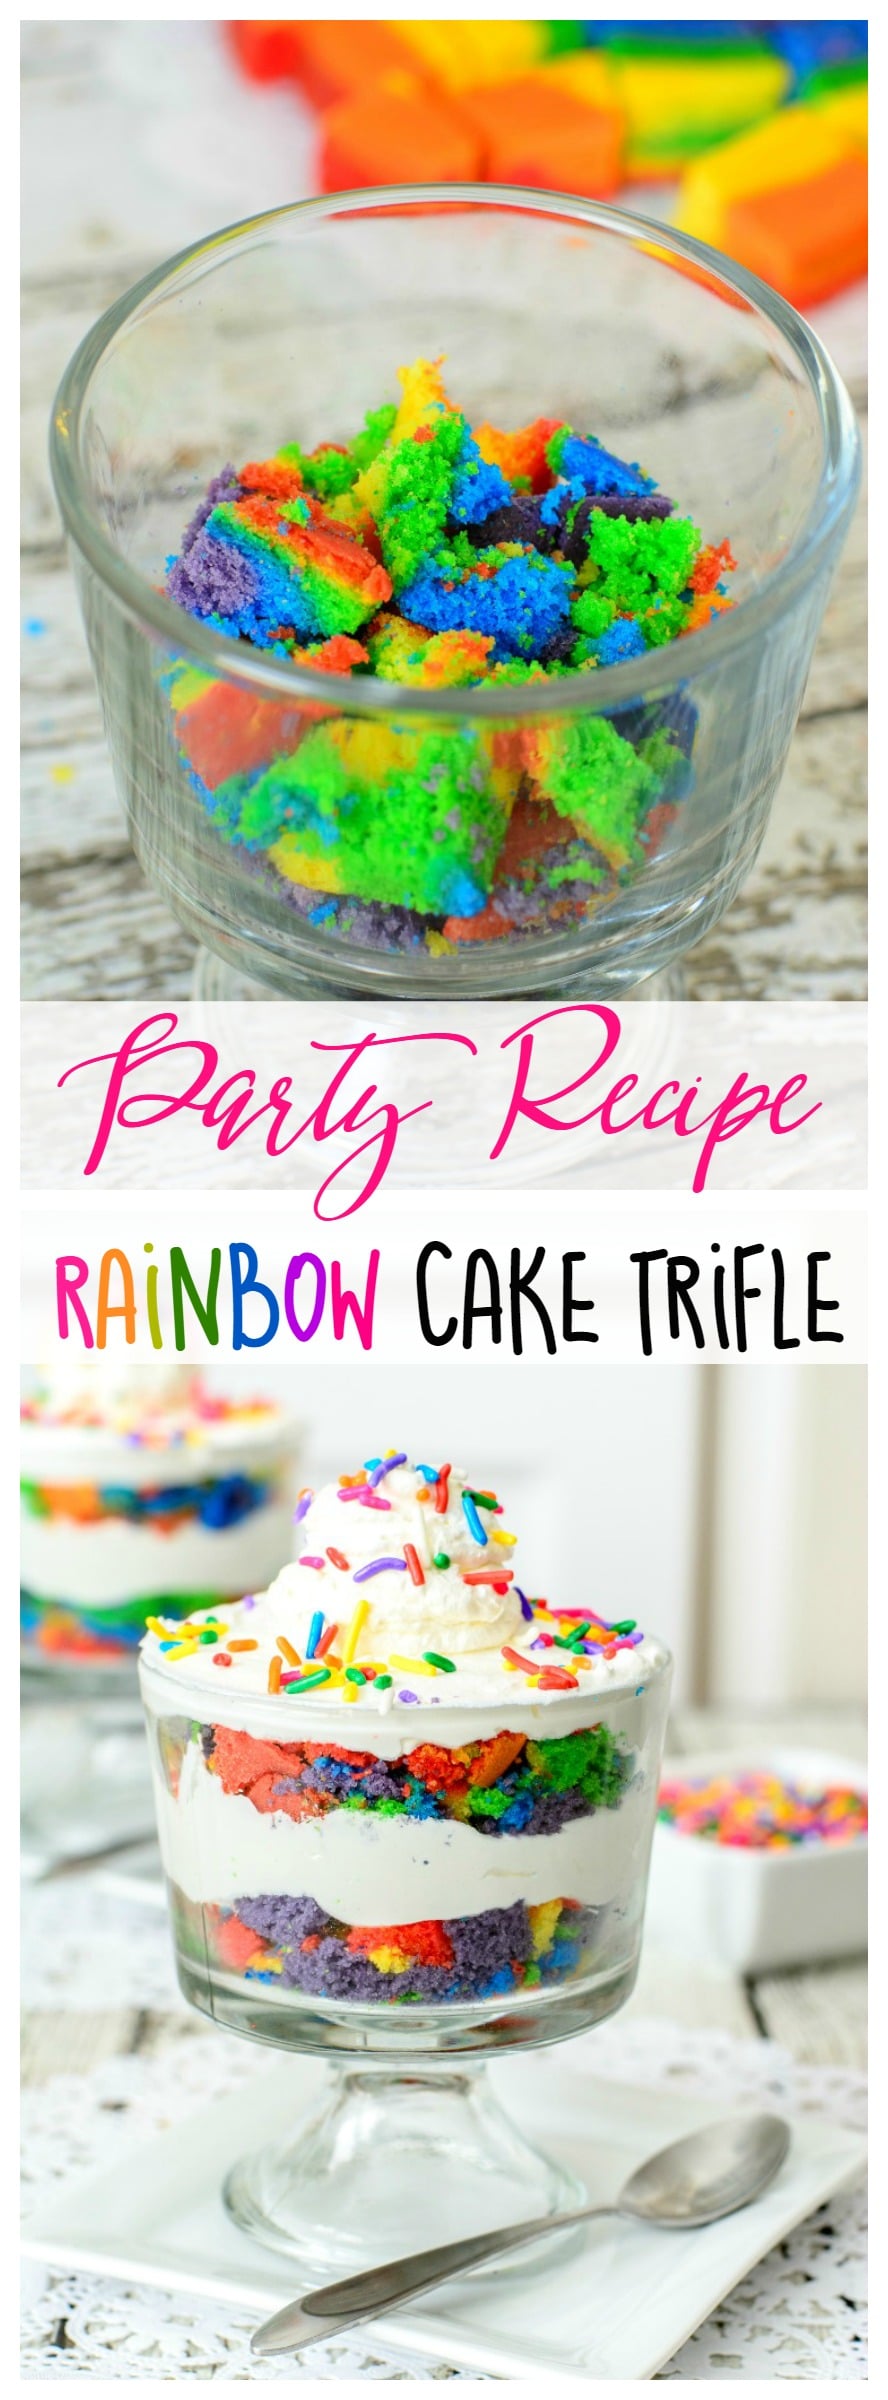 Rainbow Cake Trifle Recipe: Gorgeous and delicious way to celebrate with this layered Rainbow Trifle cake, beautiful display and even more fun to eat